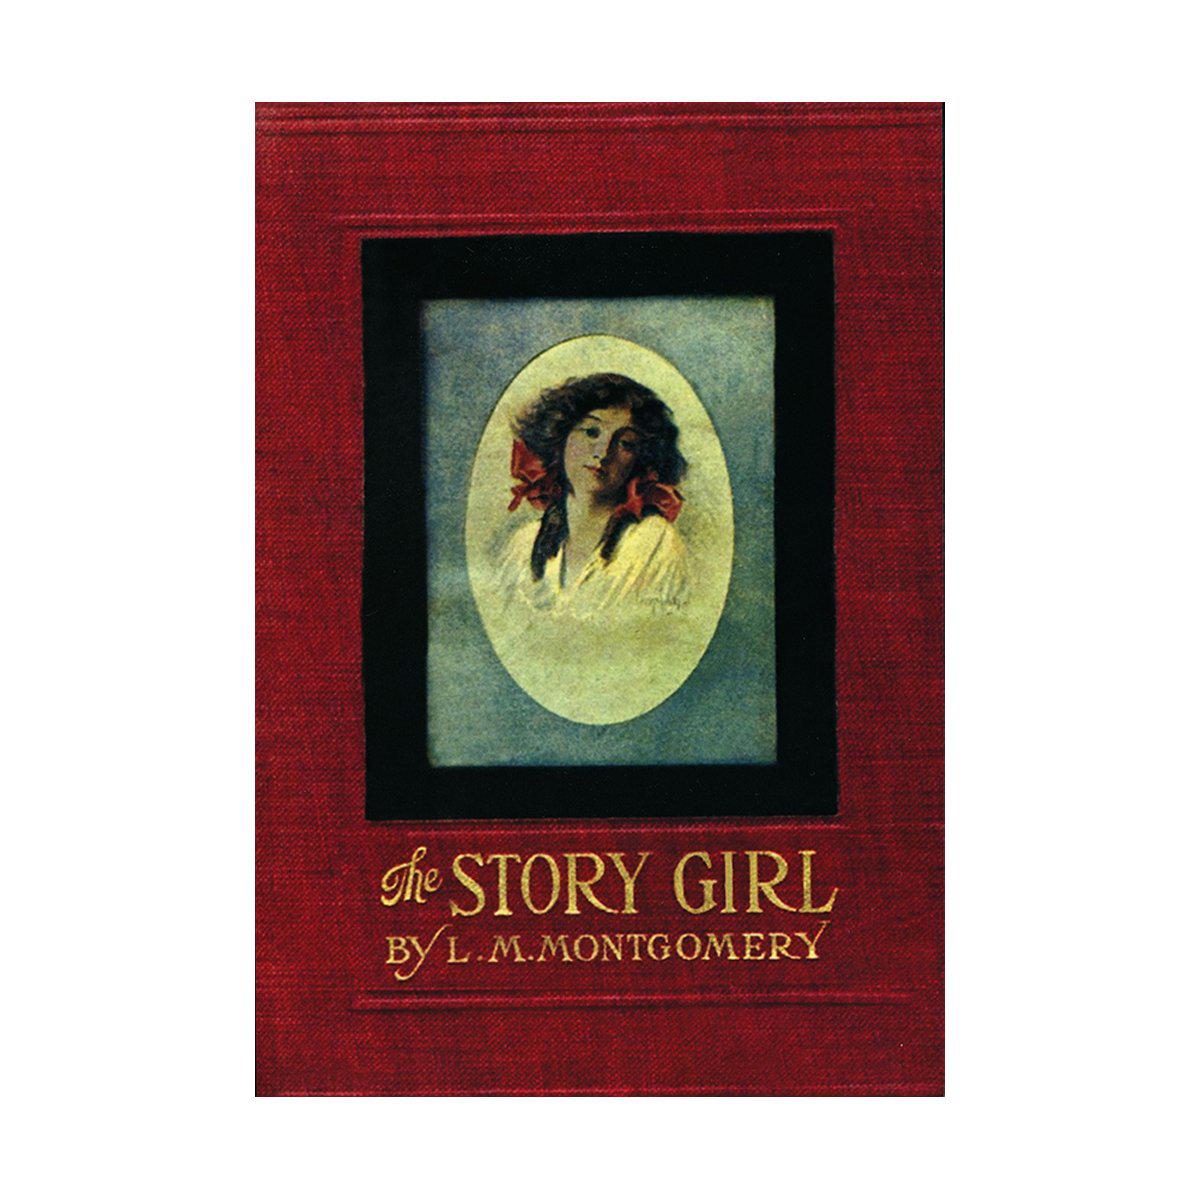 "The Story Girl" Novel - L.C. Page & Company, Boston 1911 Reproduction Edition